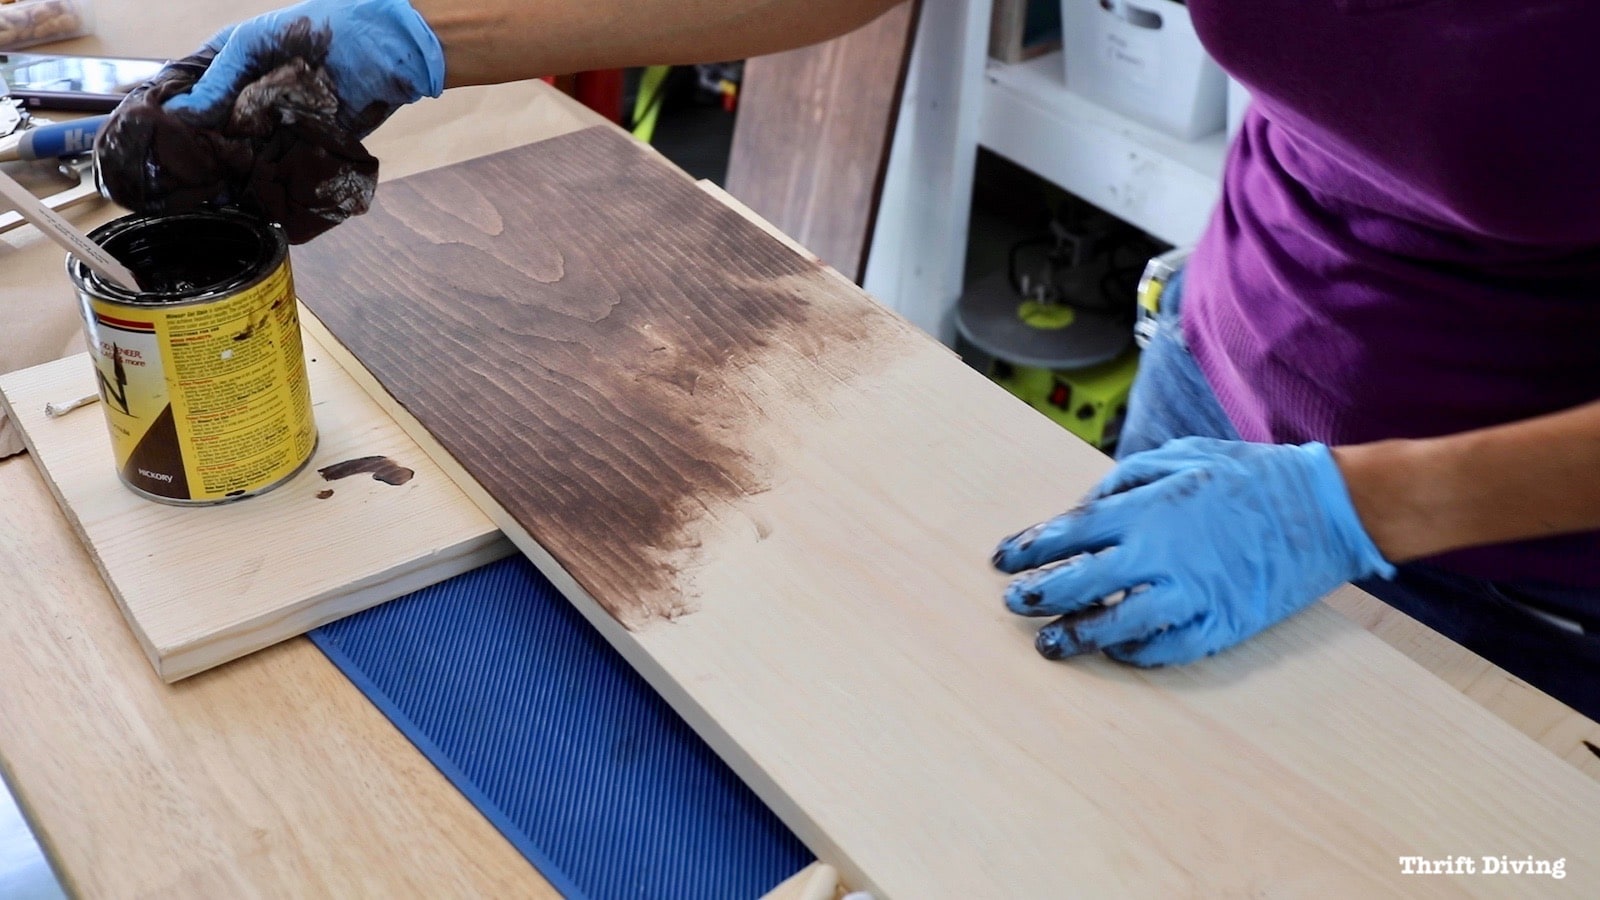 How to Build DIY Closet Shelves - Apply a coat of stain to pine boards after using pre-conditioner by MinWax. This will help to avoid blotchy closet shelves.